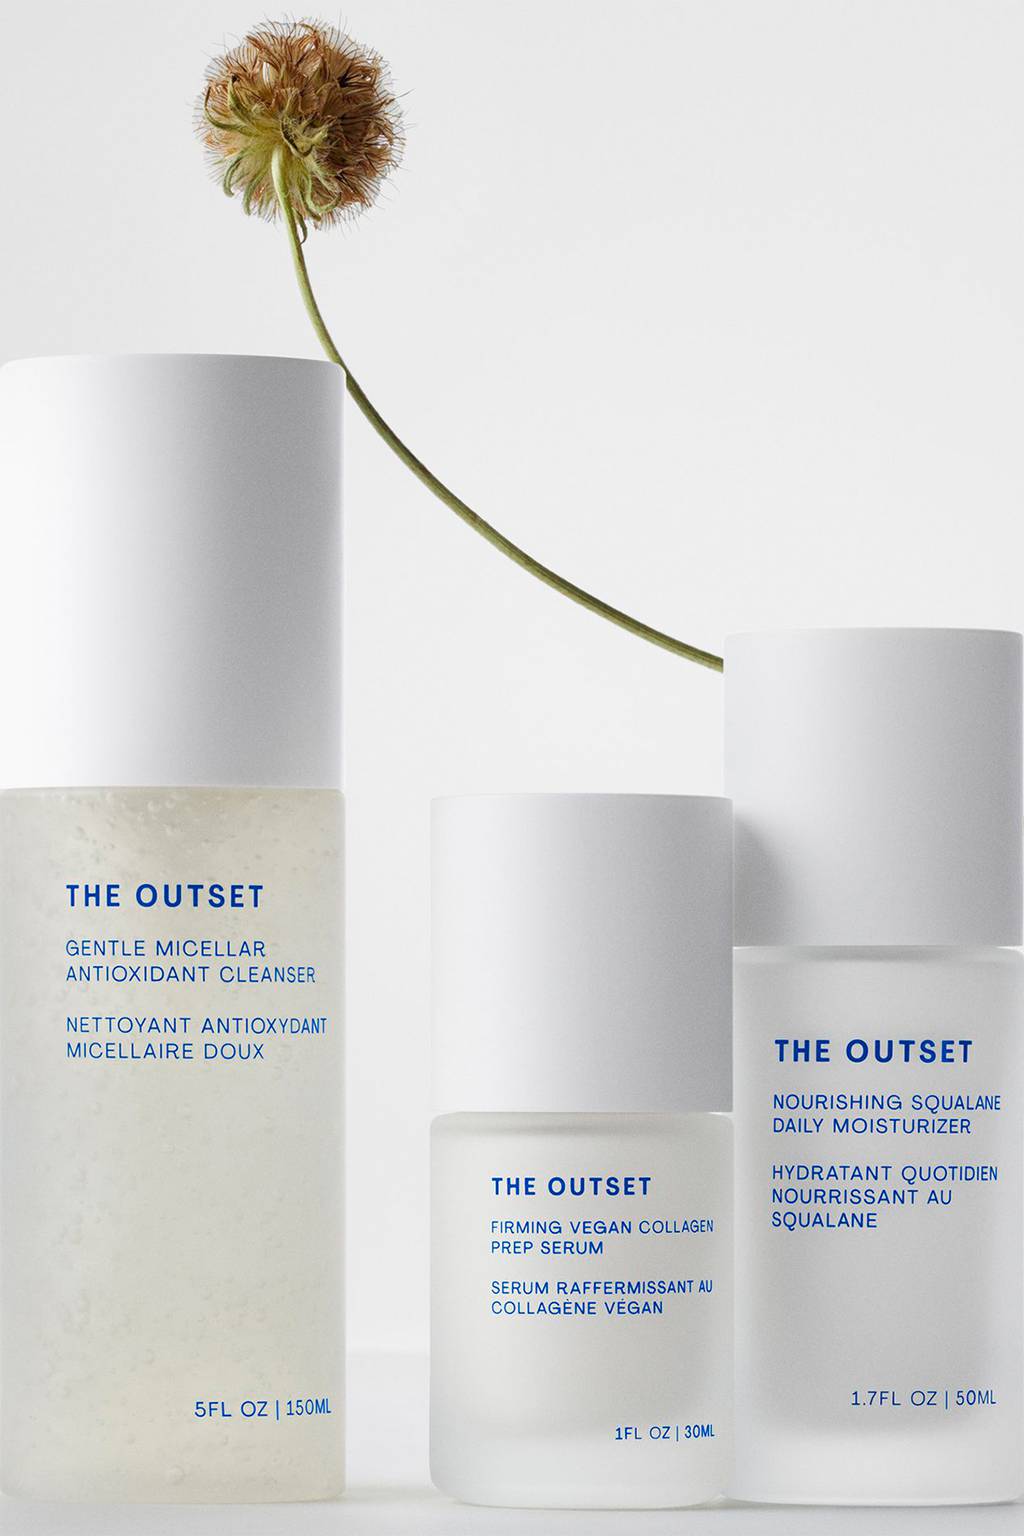 Scarlett Johansson's The Outset skin care line is the latest celebrity backed beauty line.